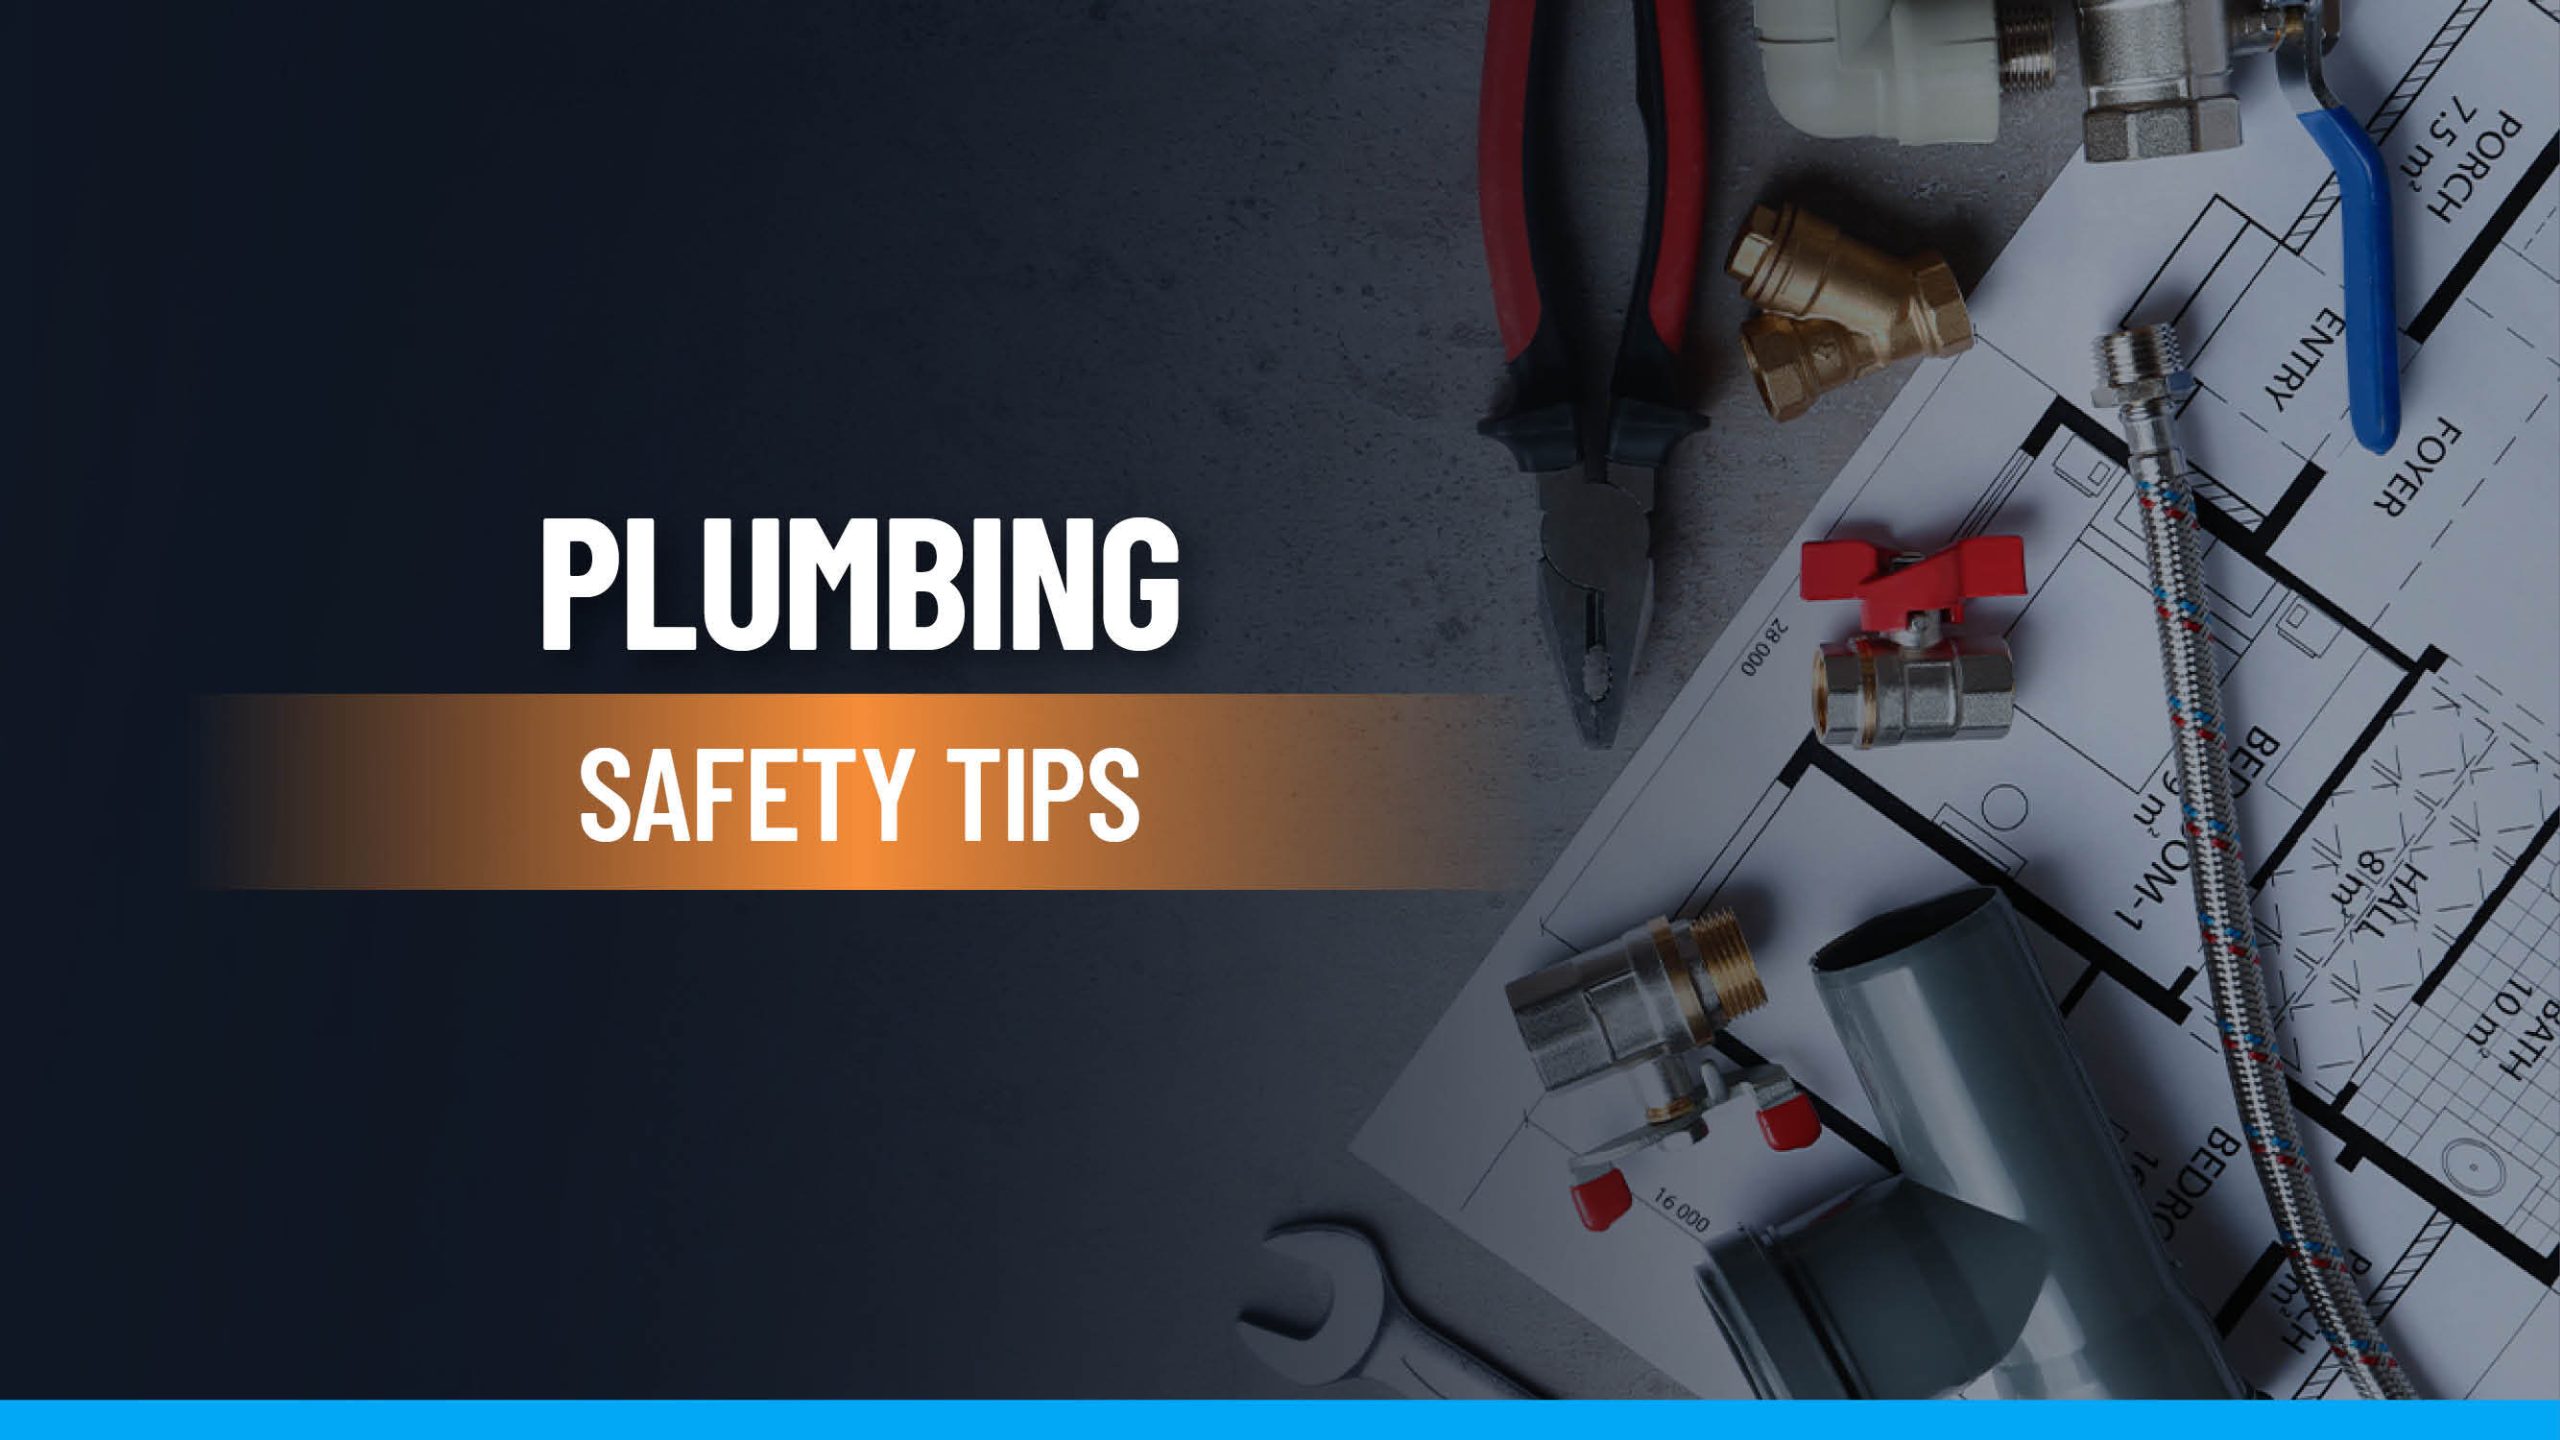 Best Practices for Industrial Plumbing Safety Compliance